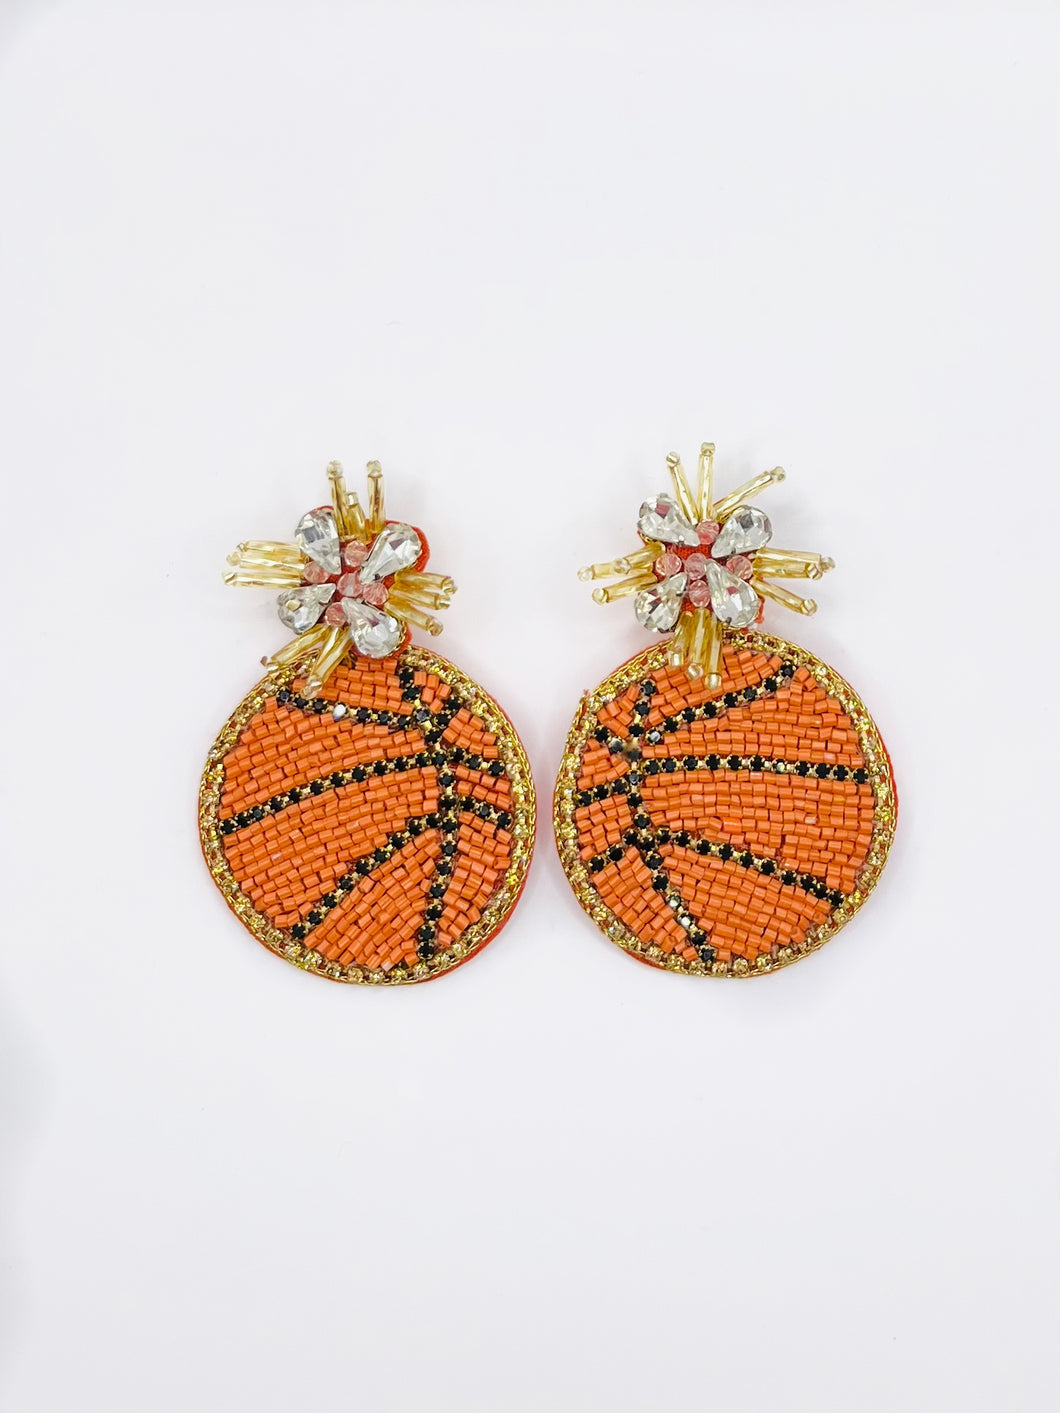 Basketball Beaded and Sequin Statement Earrings/ Game Day/ Tailgate Fashion/ NBA